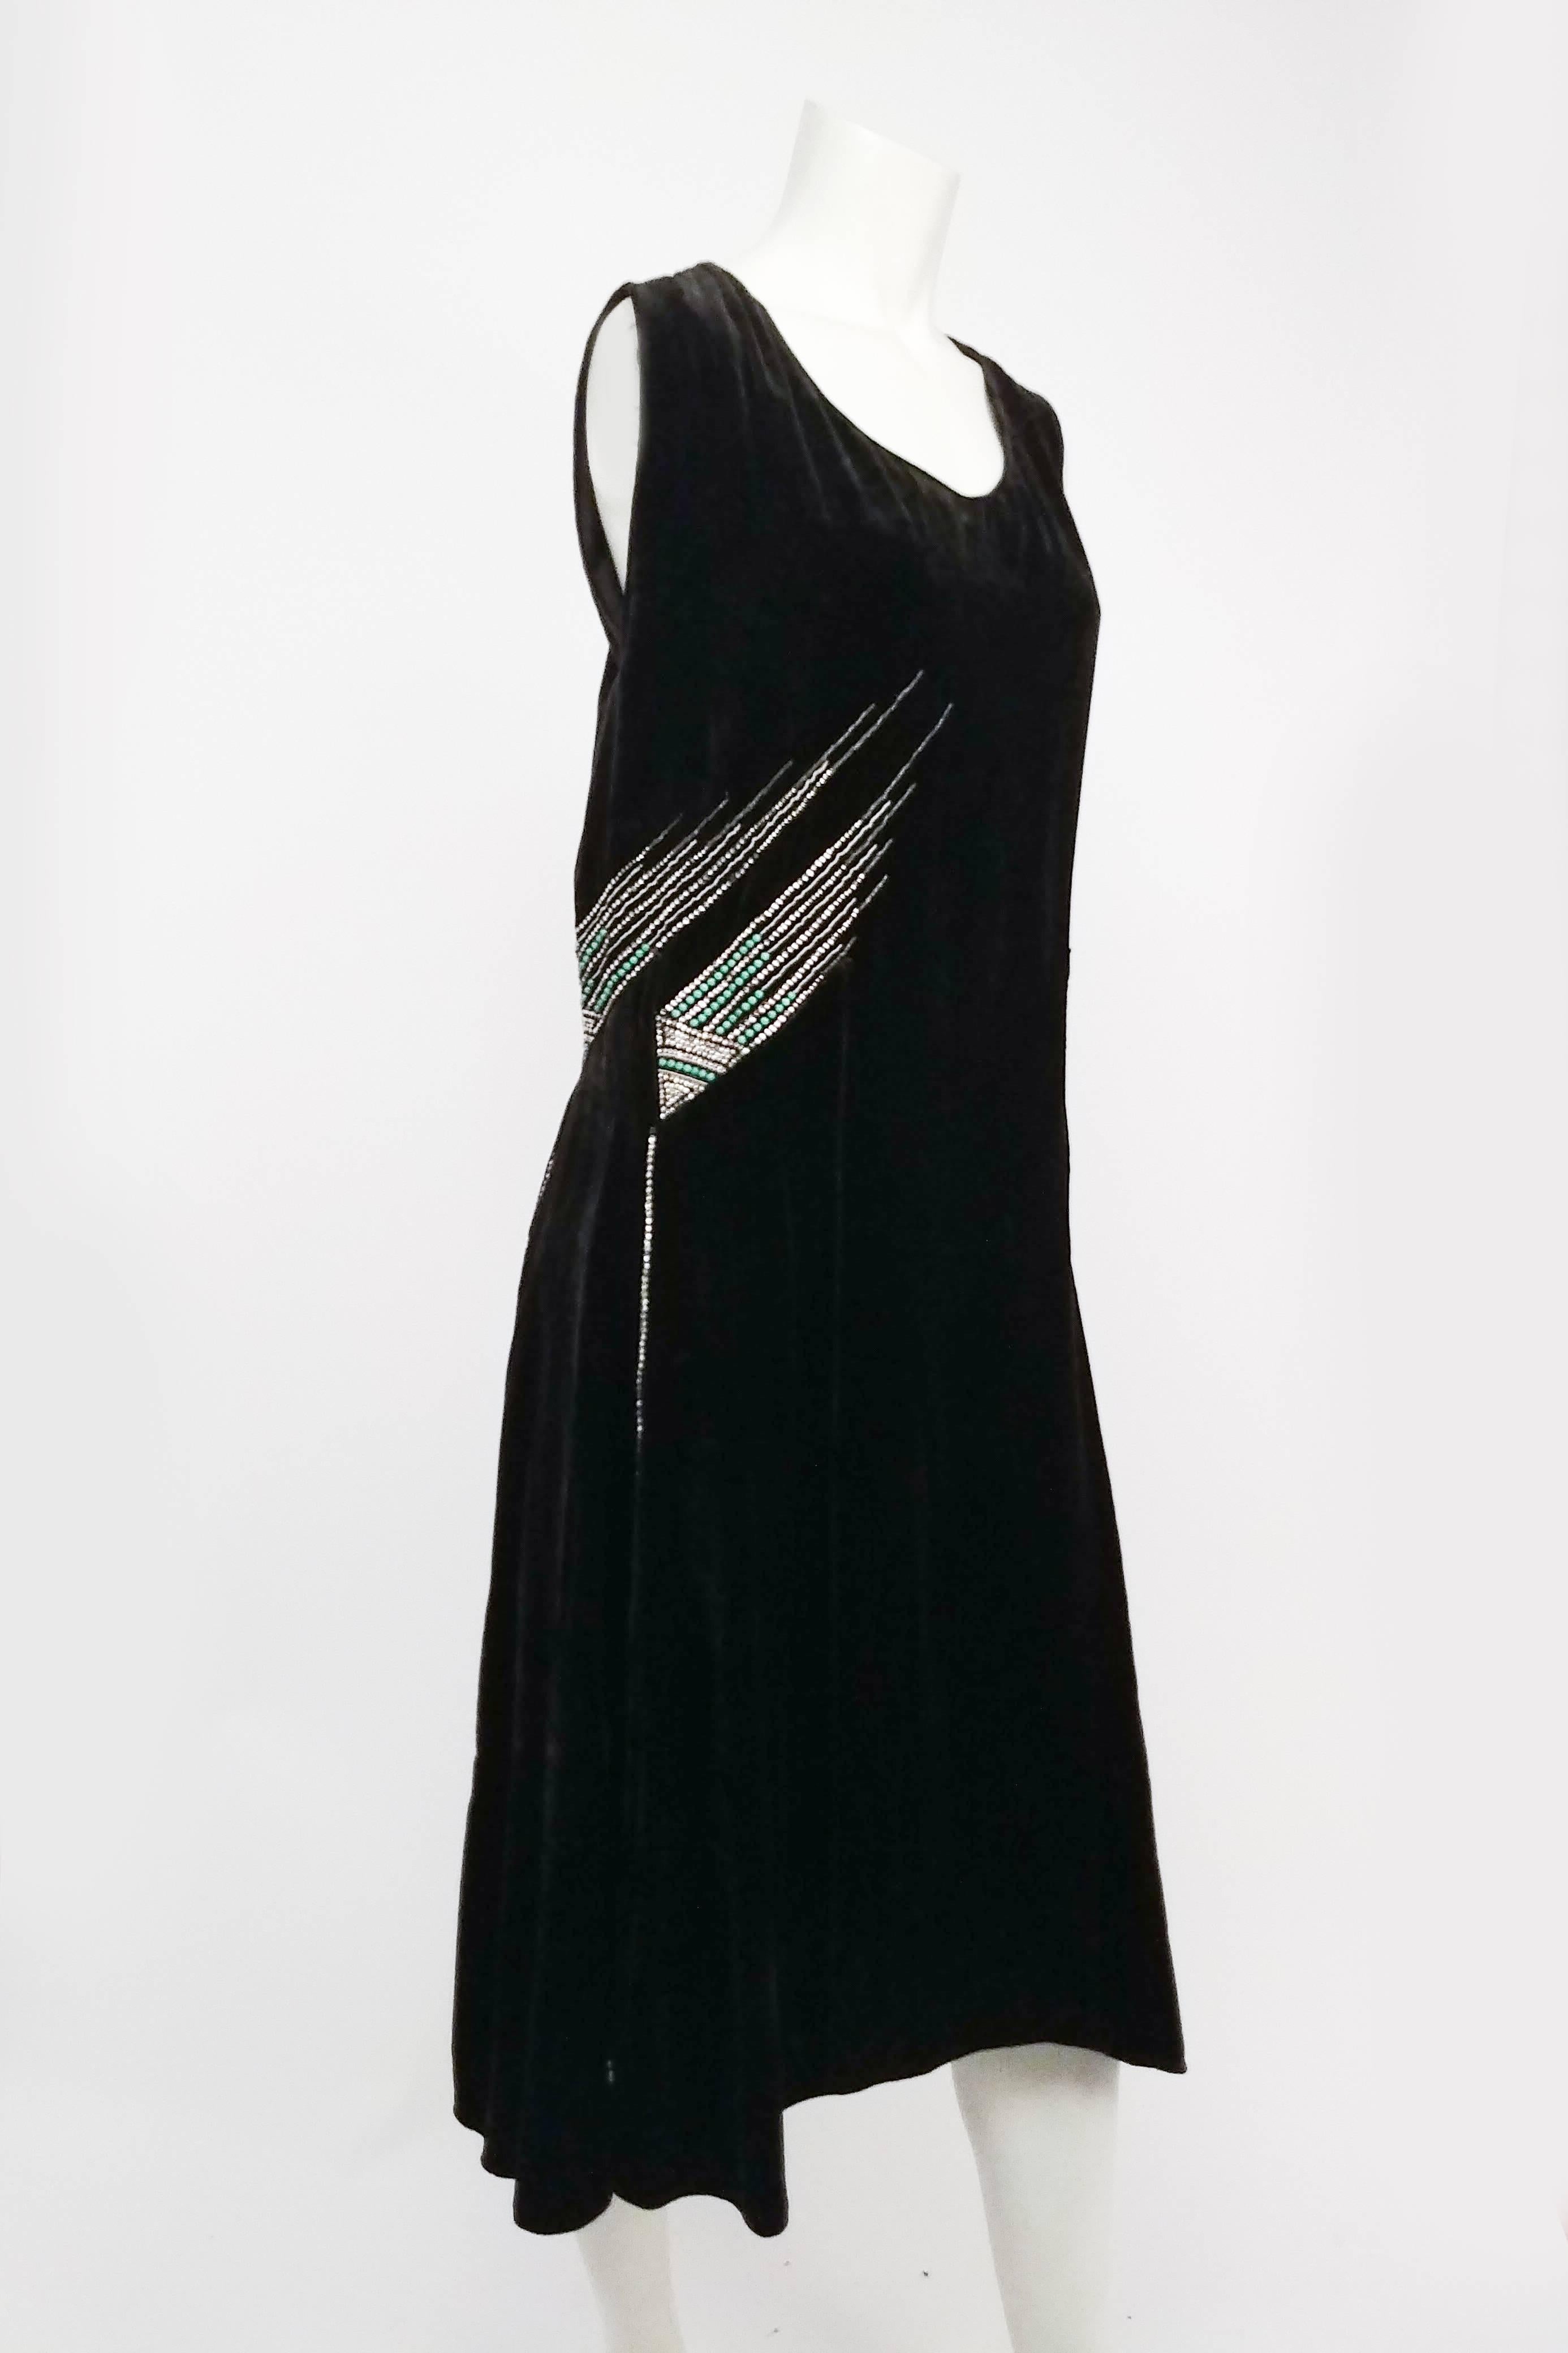 1920s Black Silk Velvet Rhinestone Dress. Rhinestone triangle design at front, with pops of turquoise. V-neck back collar, scalloped back hem with rhinestones leading down to swirled designs. Sewn-in shaped gores. No closures, slips on over head. 